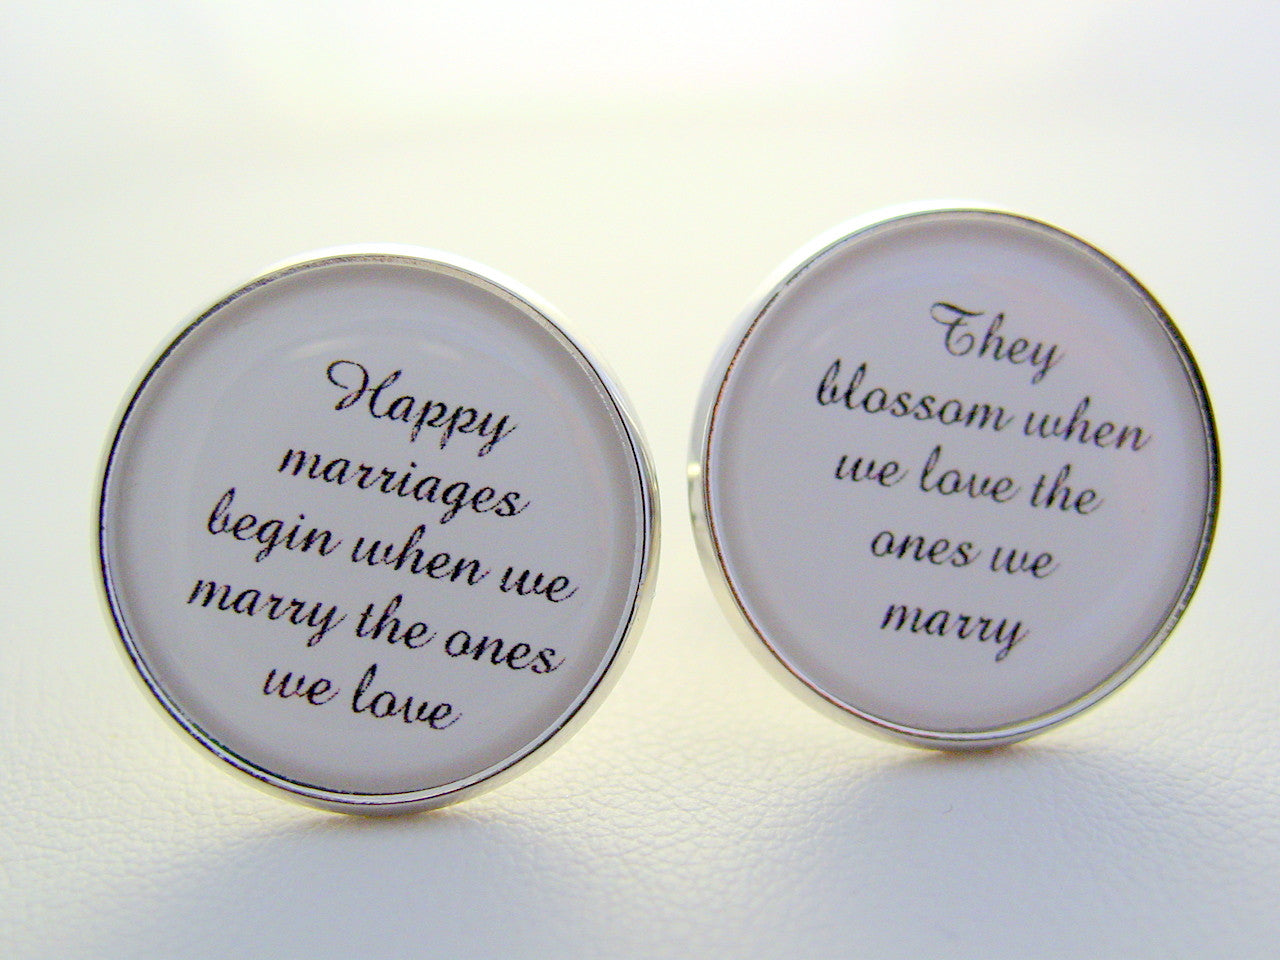 Wedding Anniversary Gift To Groom From Bride Happy Marriages Begin When We Marry The Ones We Love Cufflinks